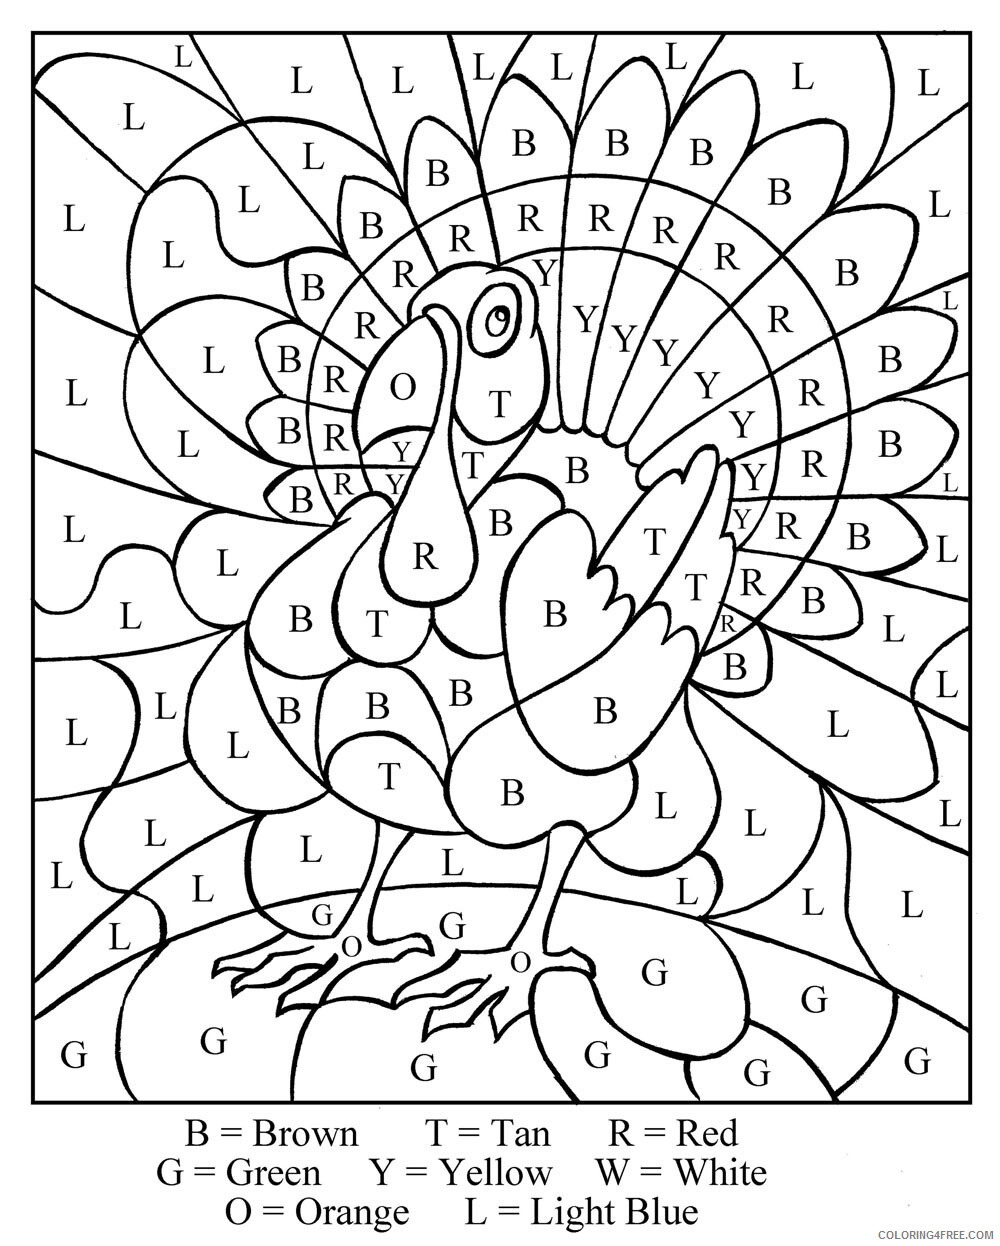 Thanksgiving Coloring Pages Holiday Color by Letter Thanksgiving Printable 2021 0909 Coloring4free